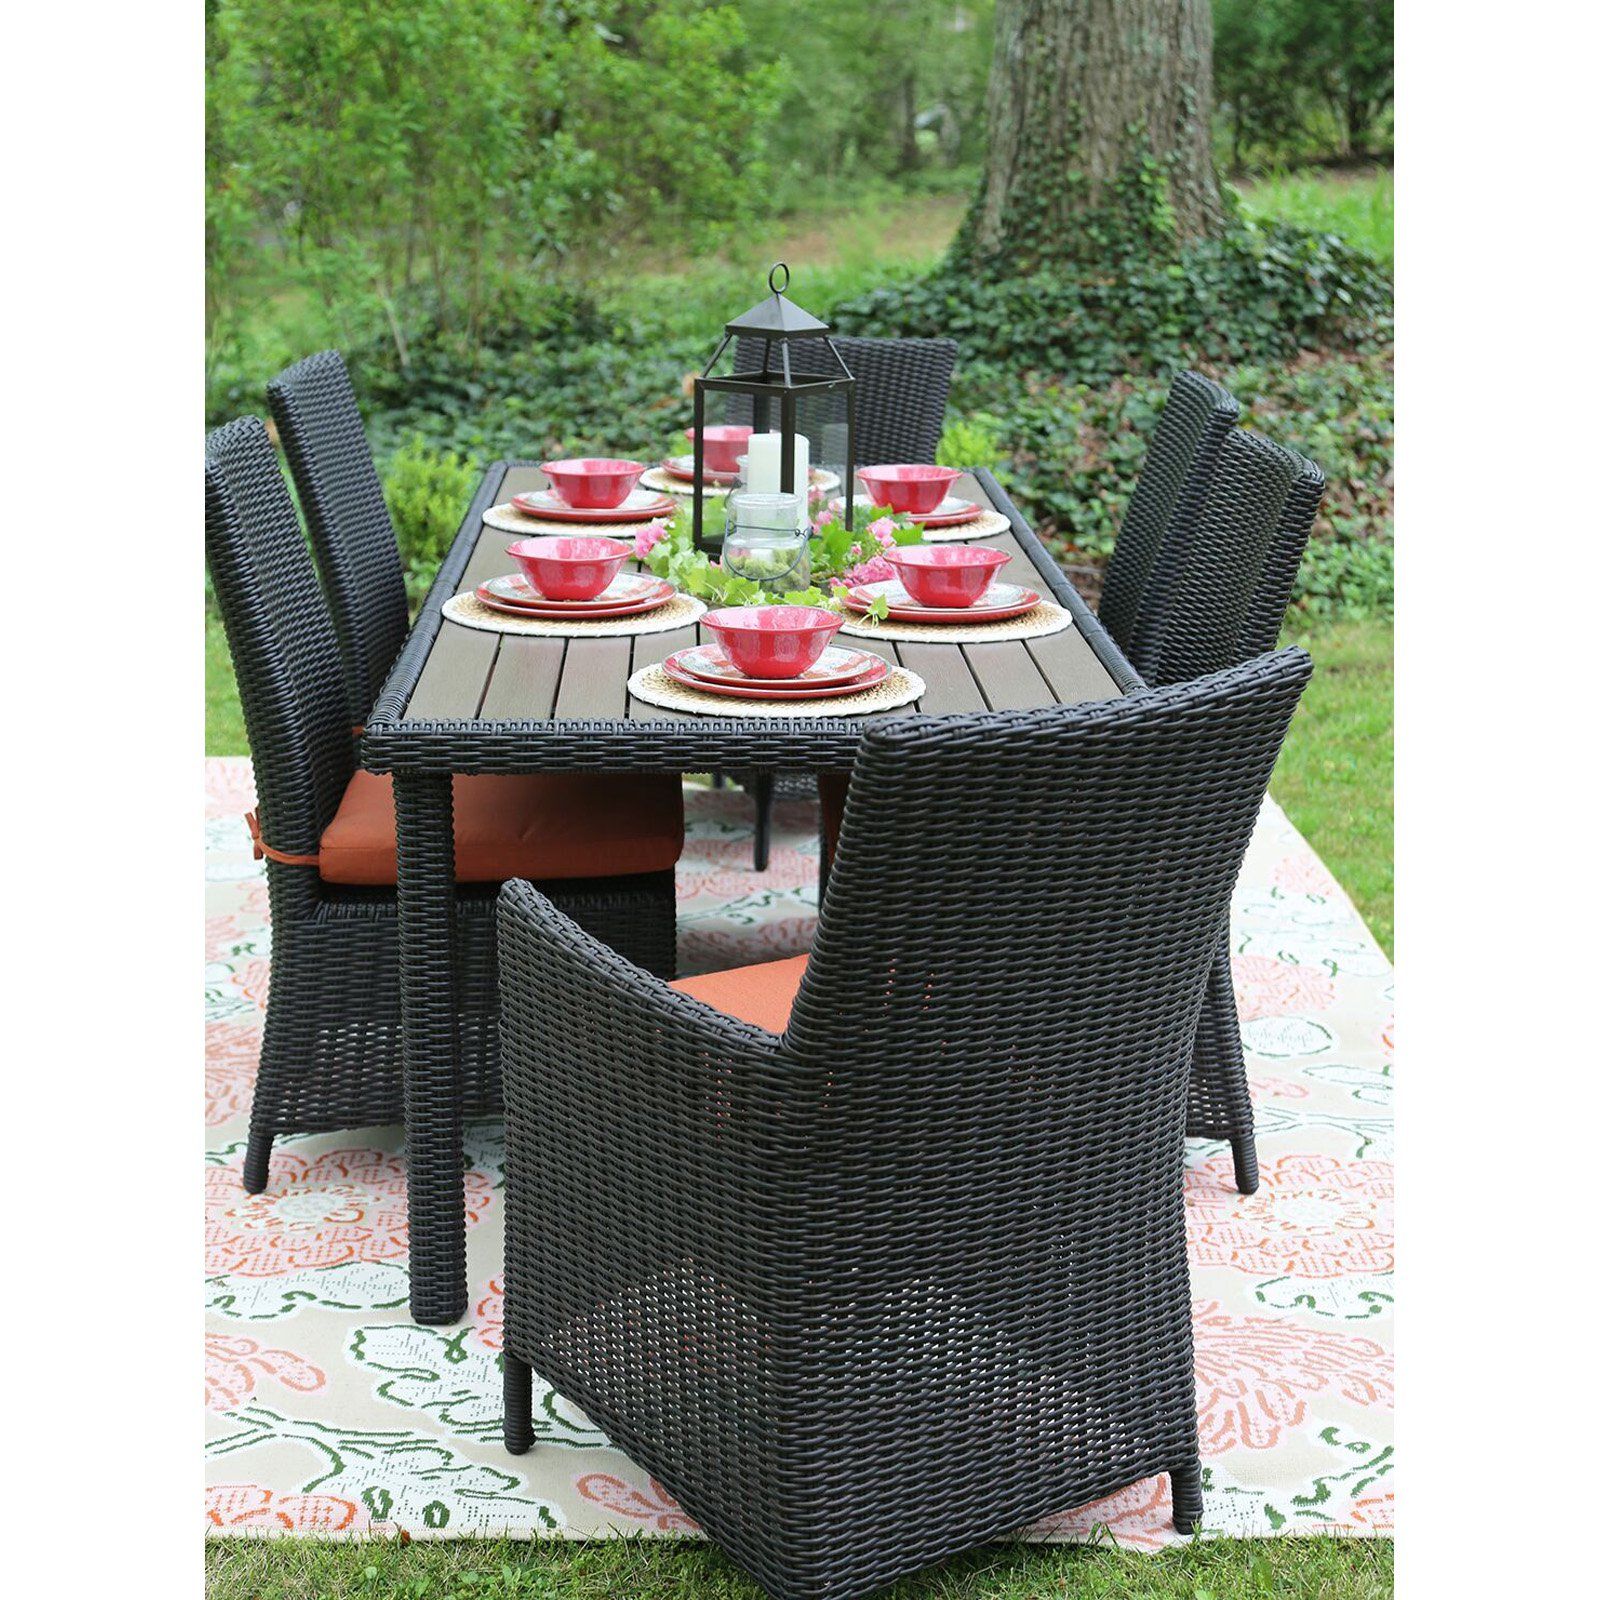 Ae Outdoor Denali 7 Piece All Weather Wicker Rectangular Patio Dining Within Rectangular 7 Piece Patio Dining Sets (View 6 of 15)